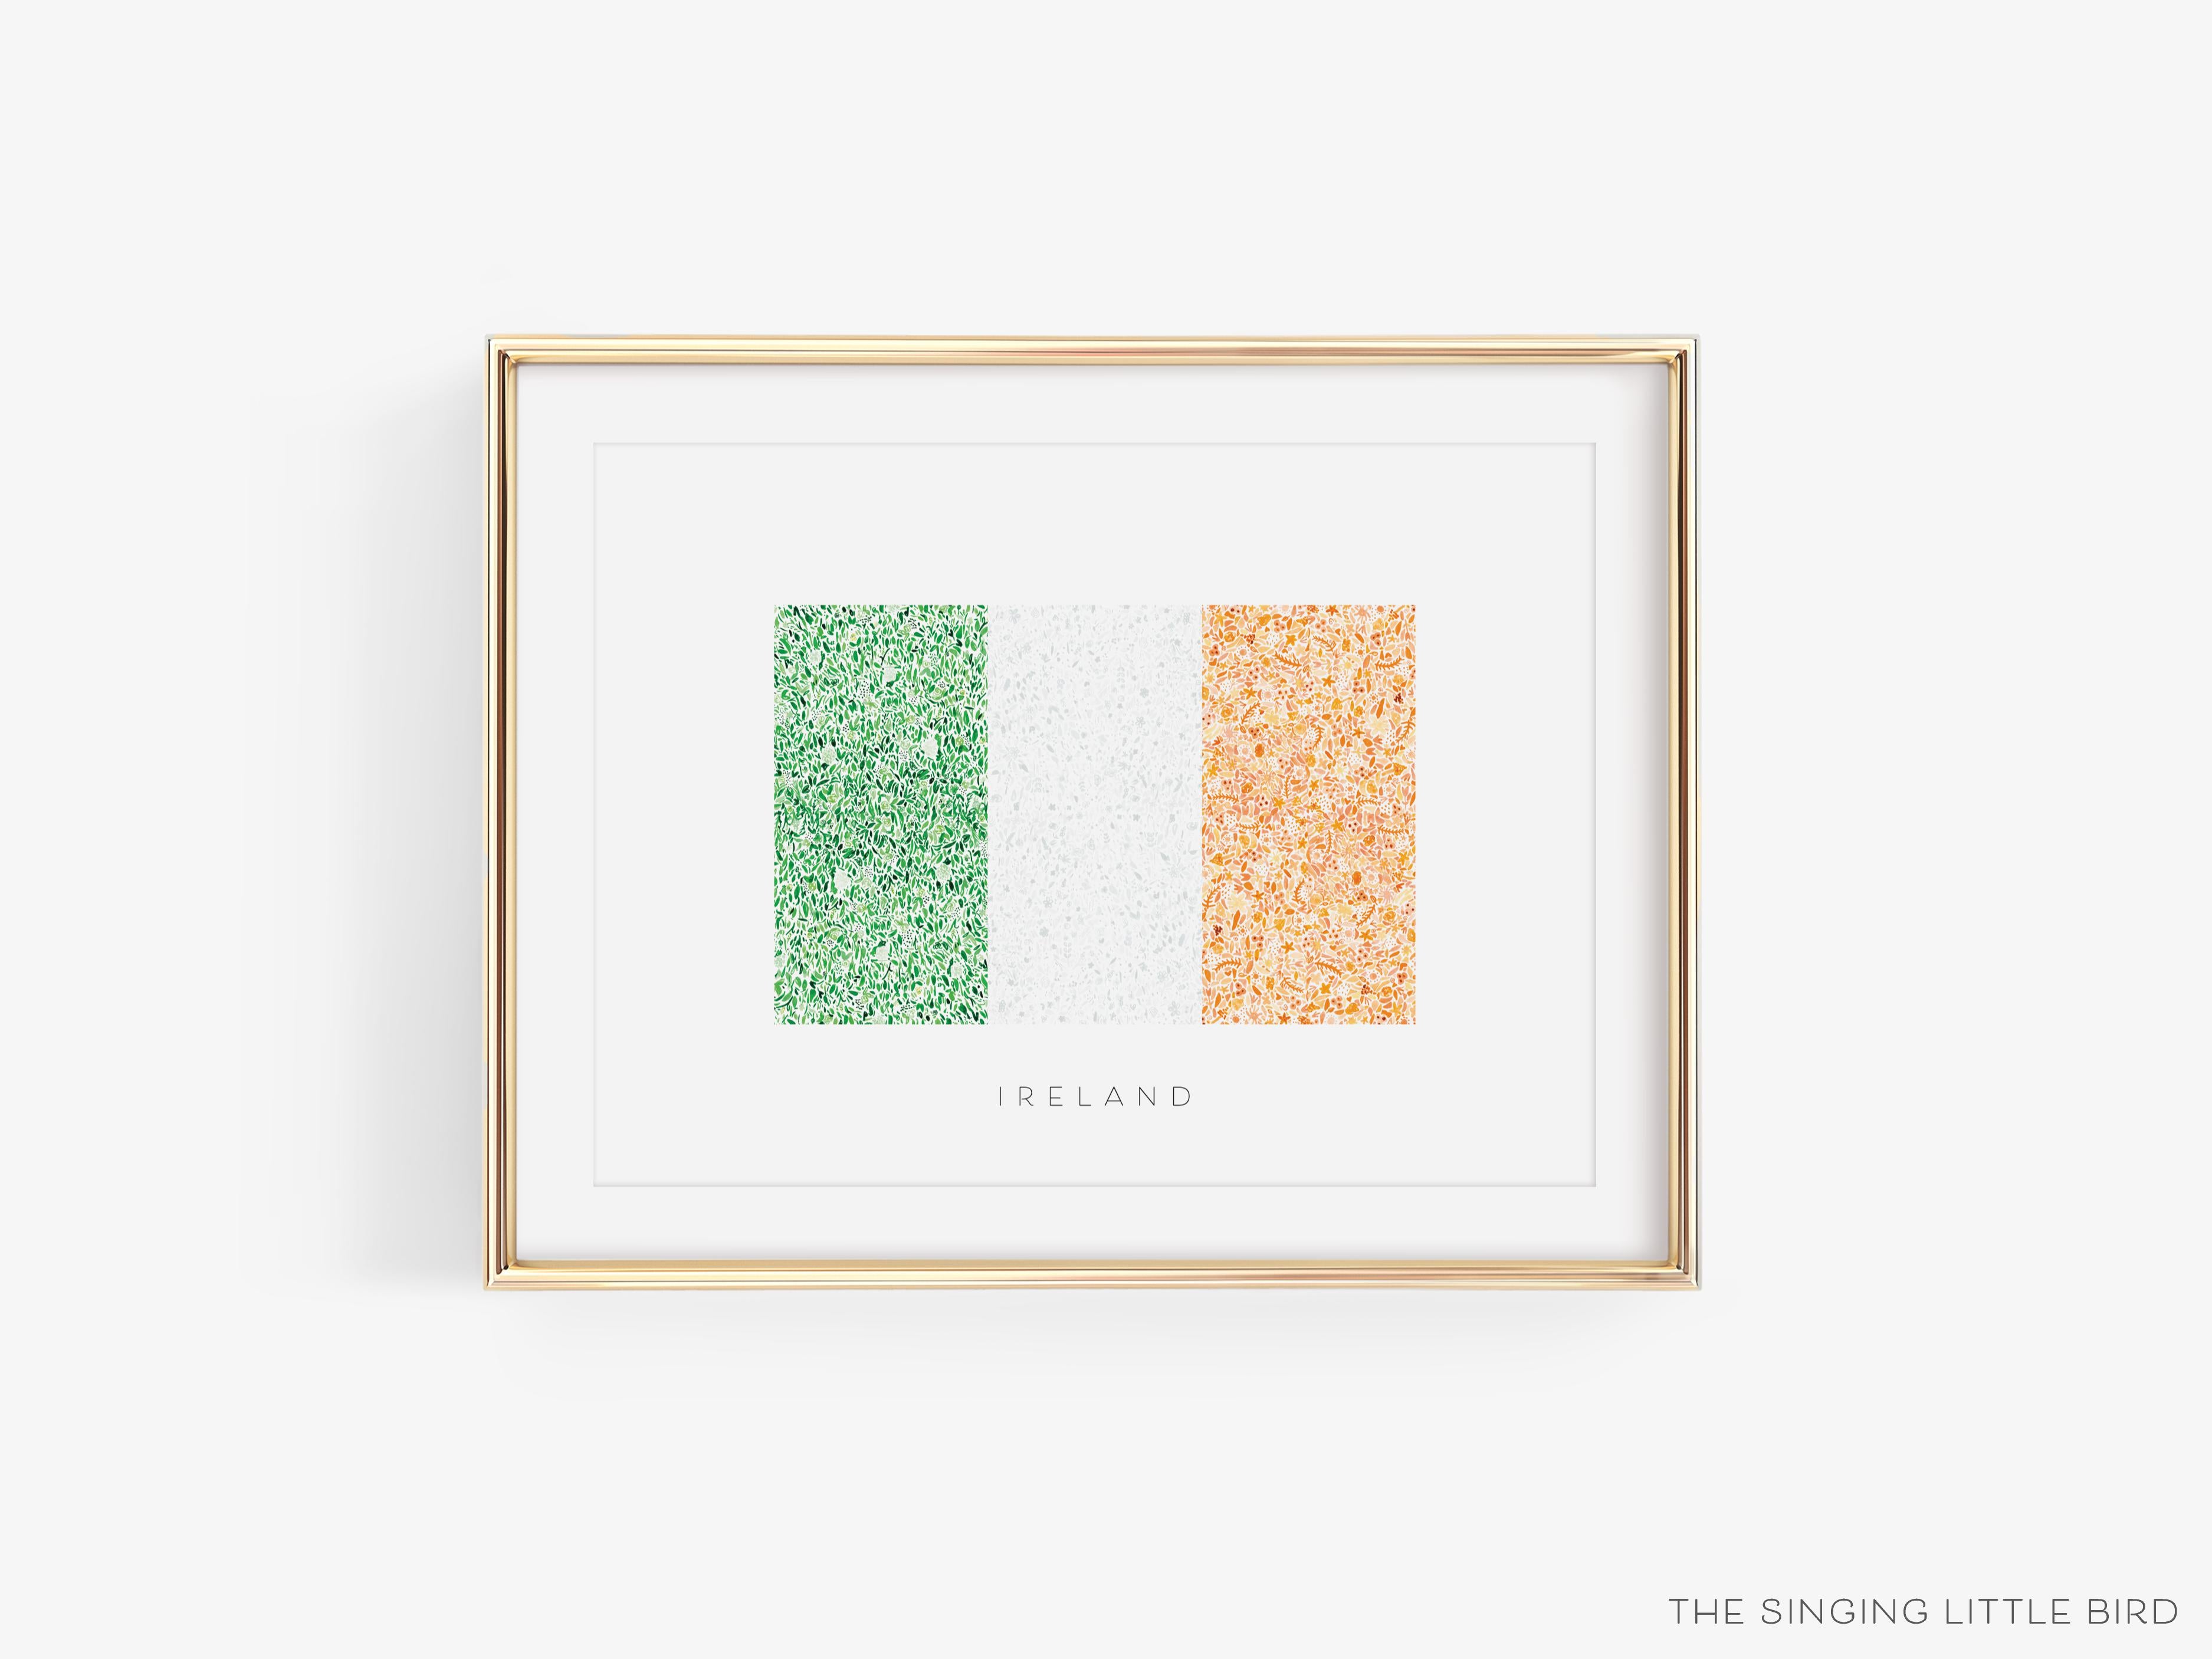 Irish Flag Ireland Art Print-This watercolor art print features our hand-painted Irish Flag, printed in the USA on 120lb high quality art paper. This makes a great gift or wall decor for the Irish lover in your life.-The Singing Little Bird